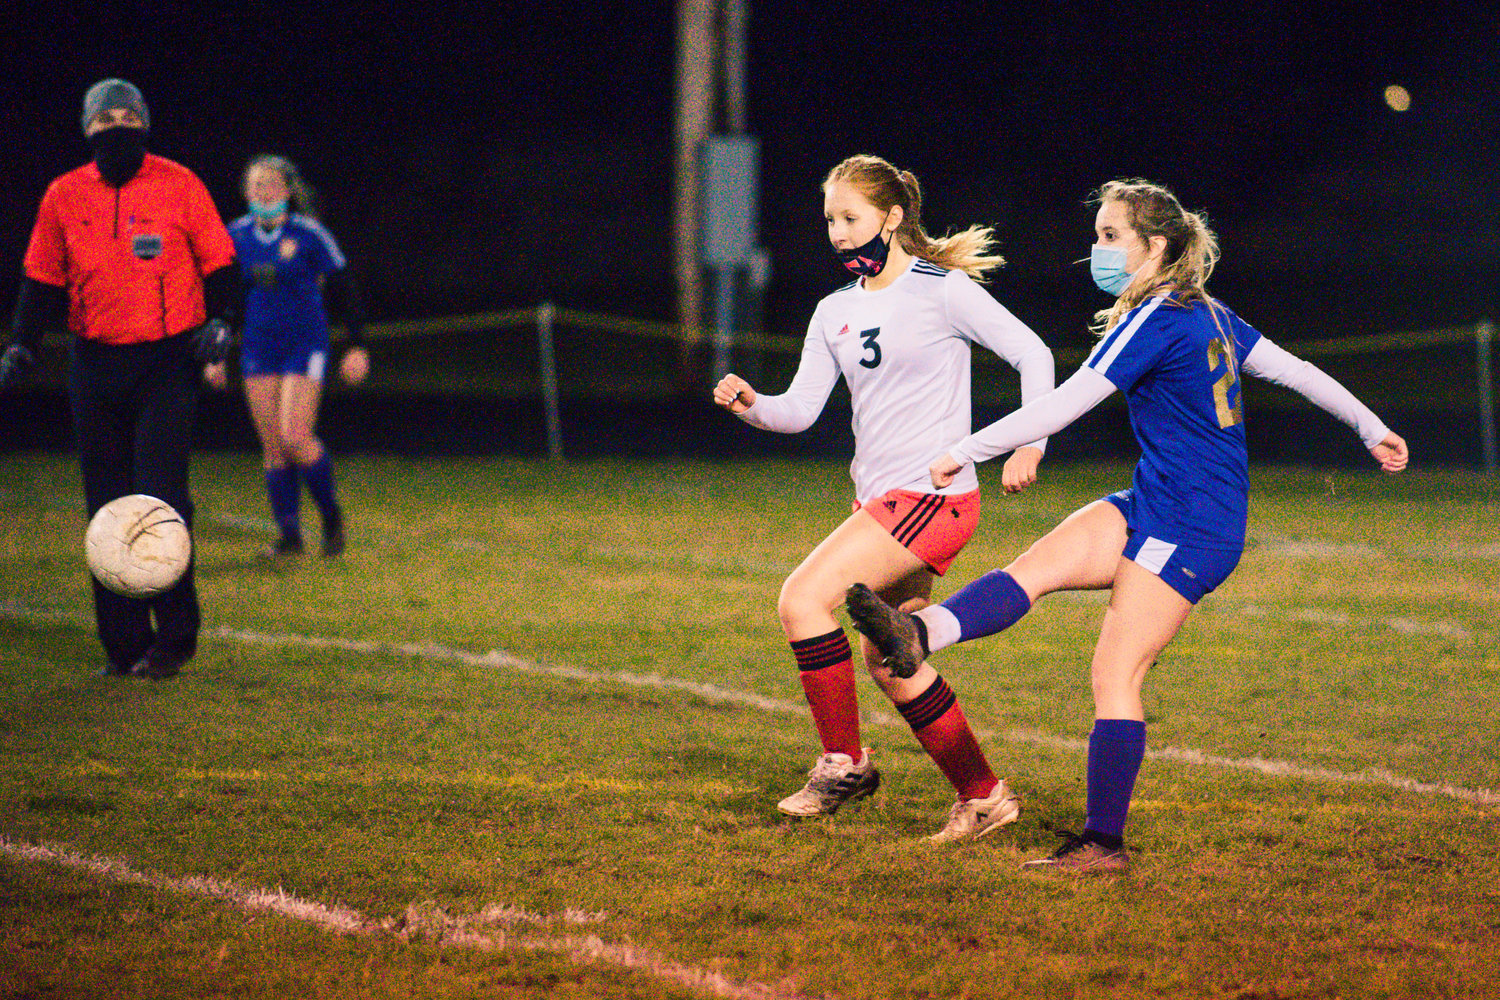 Onalaska's Callie Lawrence (21) kicks the ball down field during a game against Toledo Monday night.